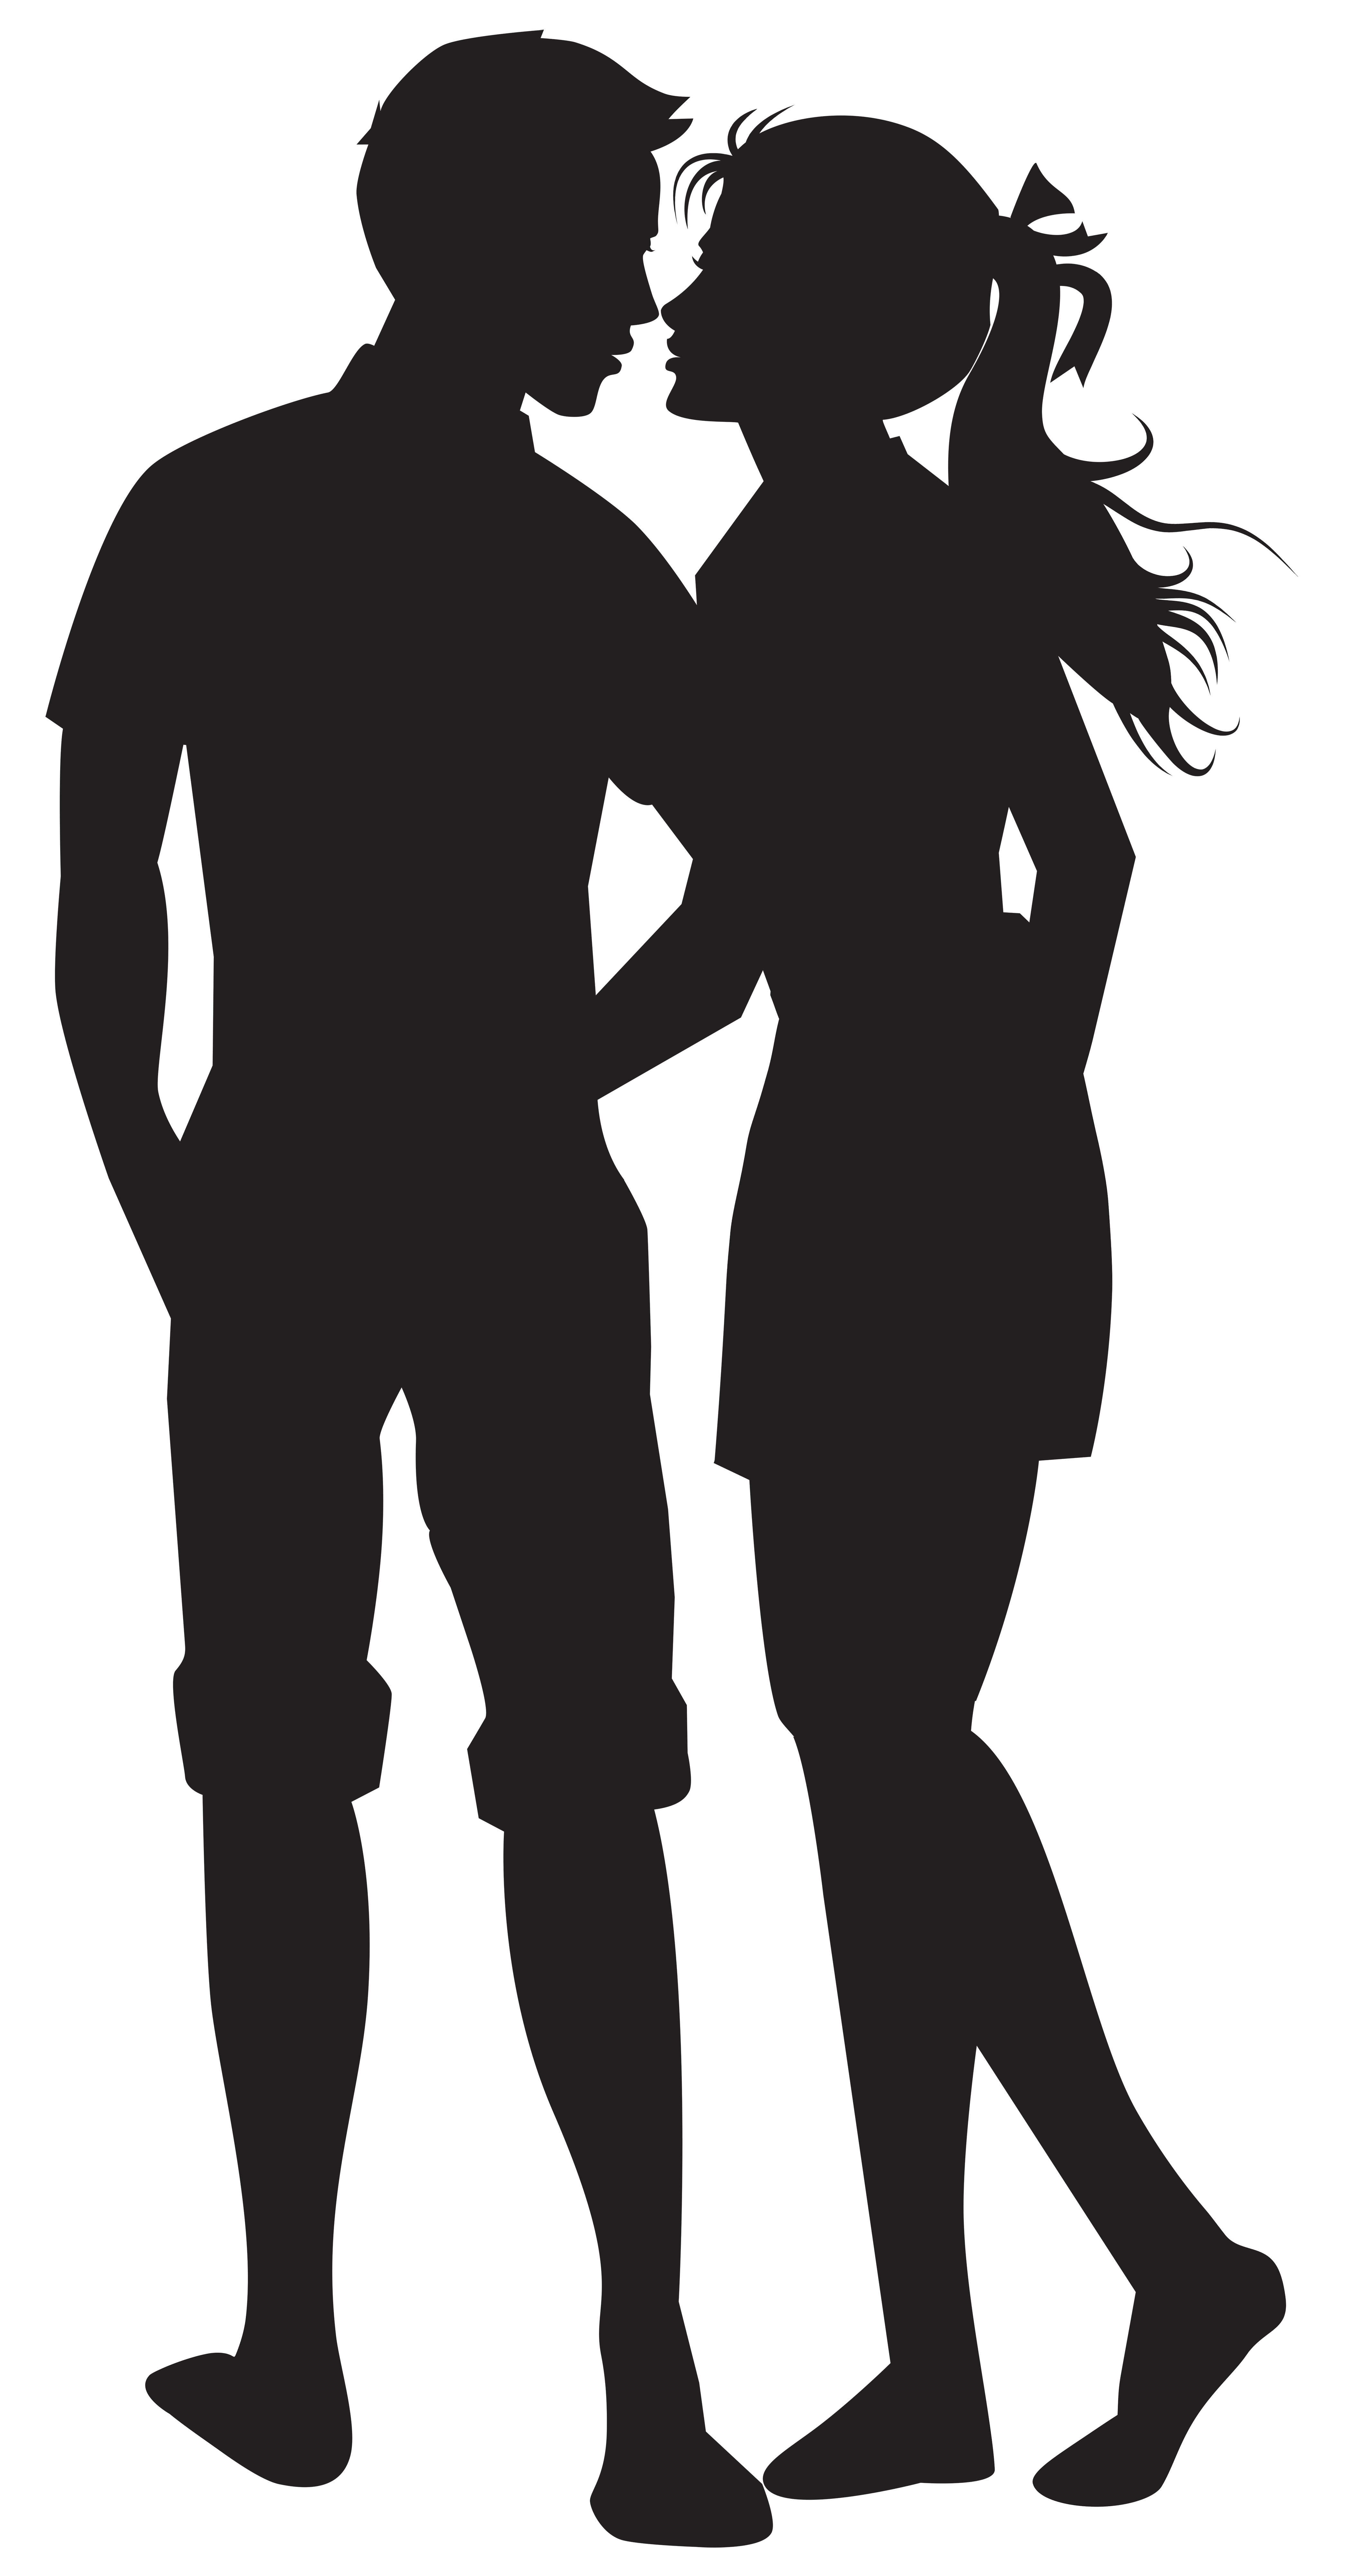 Kiss clipart father indian. Couple png silhouettes clip